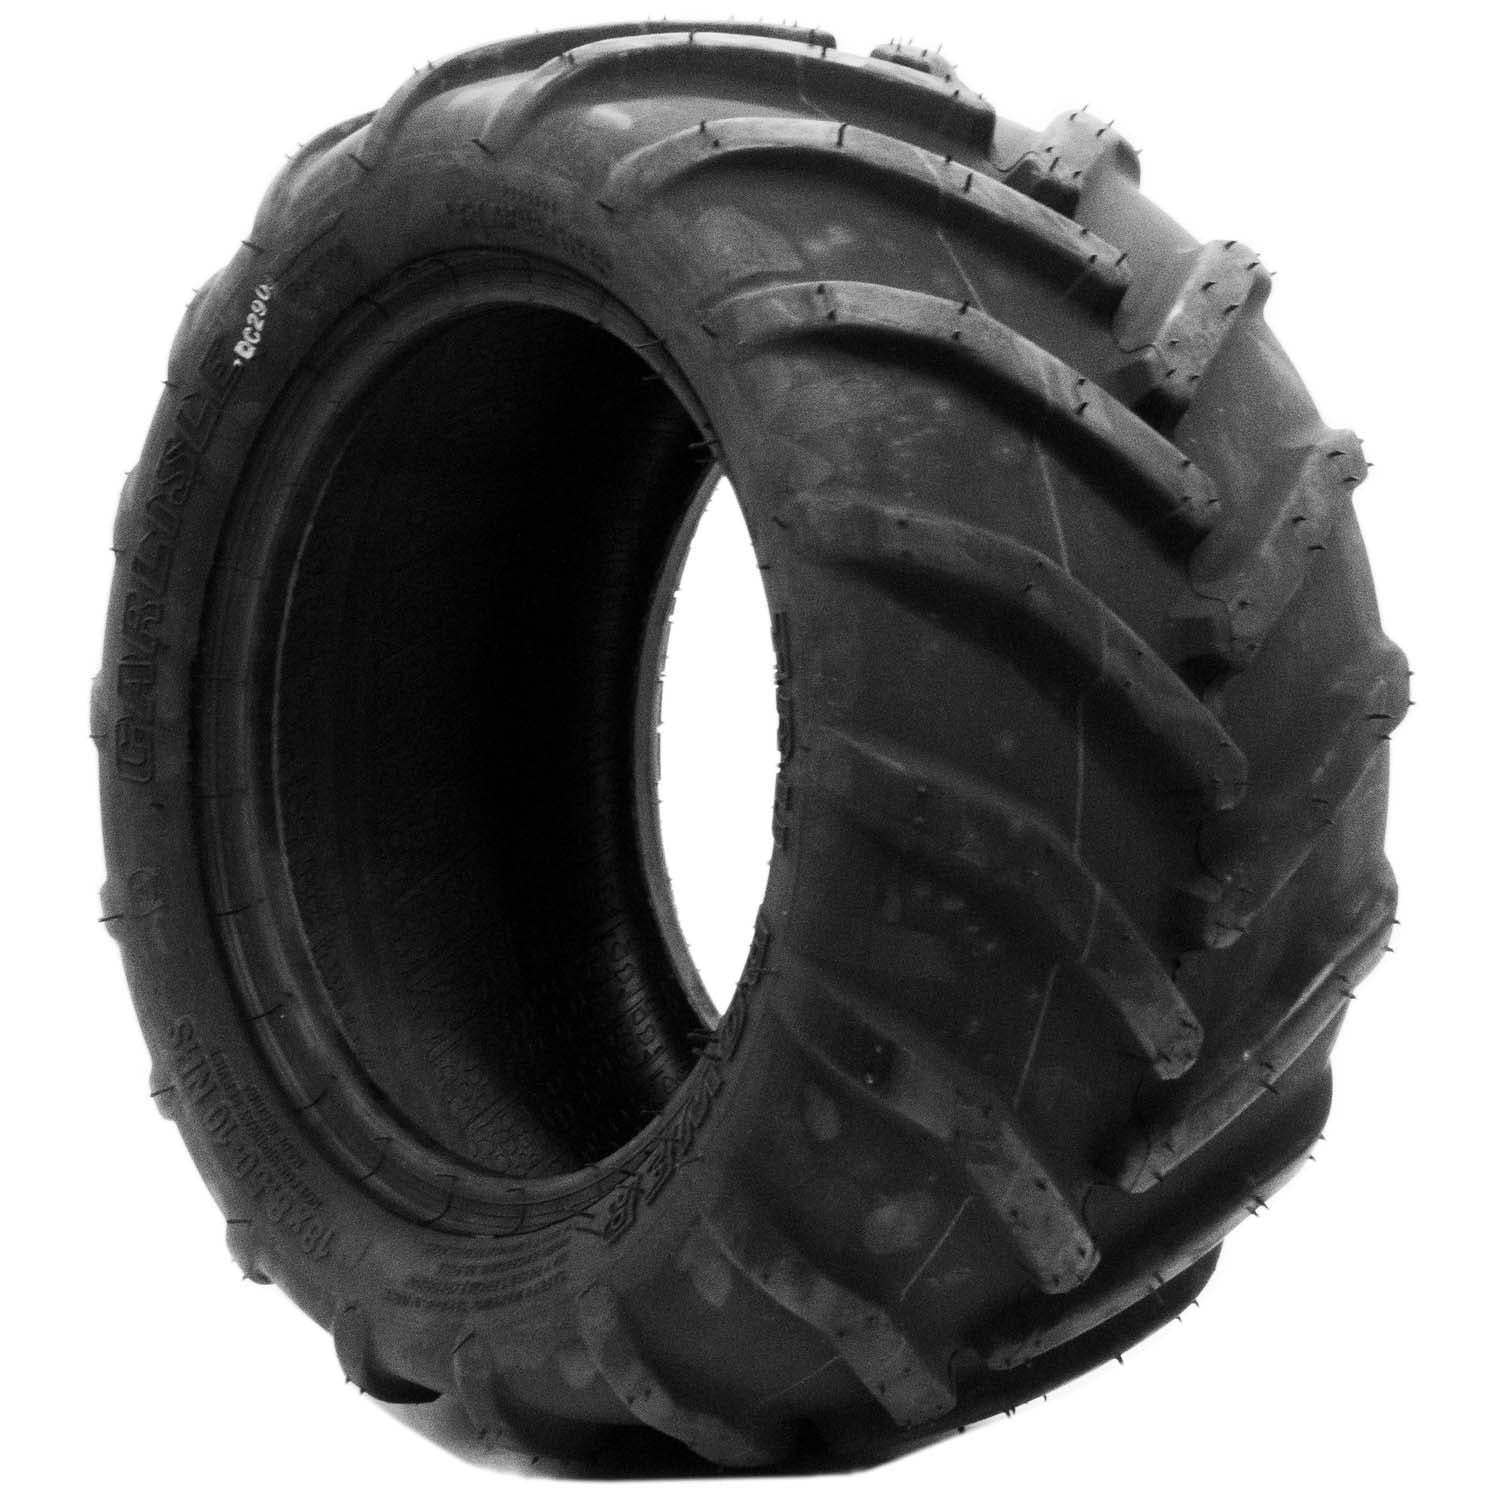 Carlisle Tru Power Lawn and Garden Traction Tire 4ply 23x8.50-12